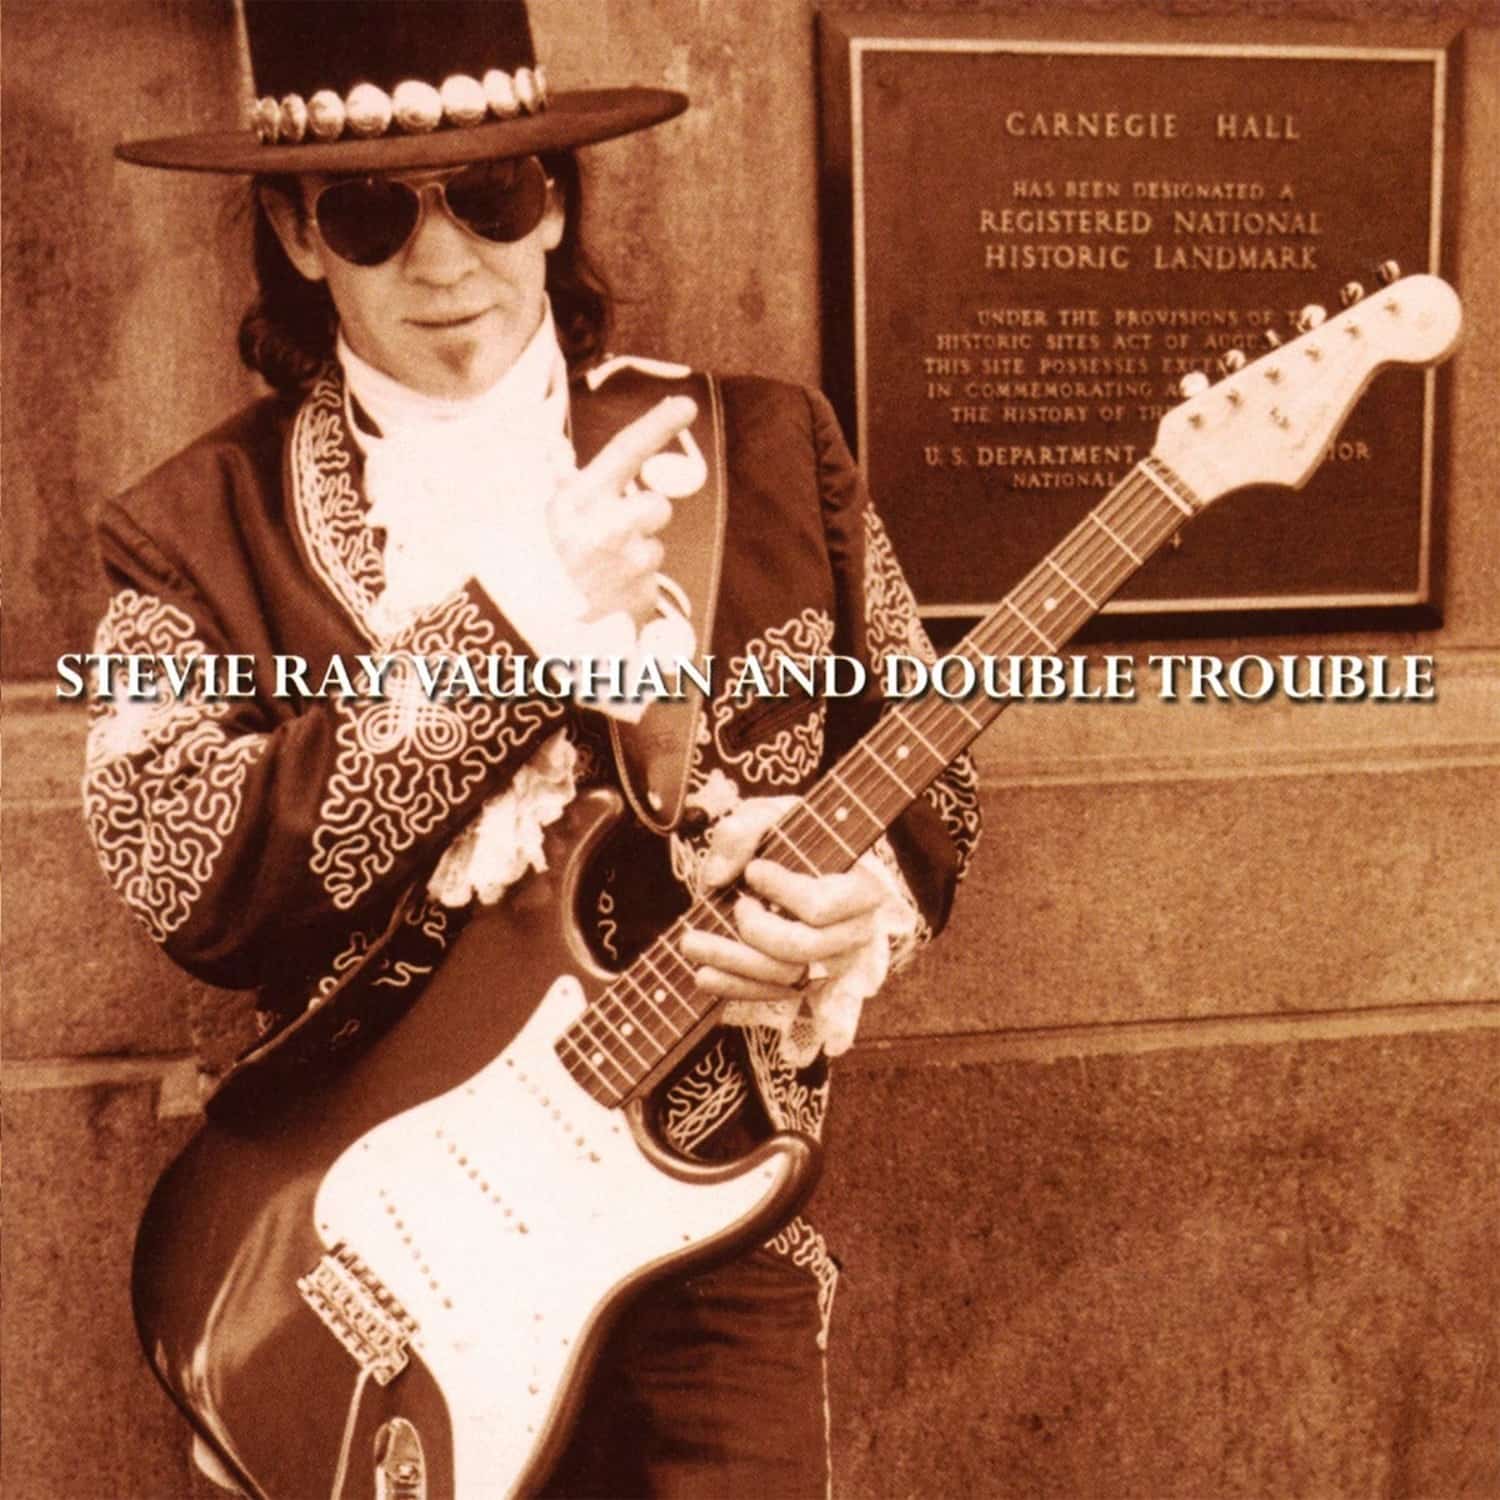 Stevie Ray Vaughan - LIVE AT CARNEGIE HALL 